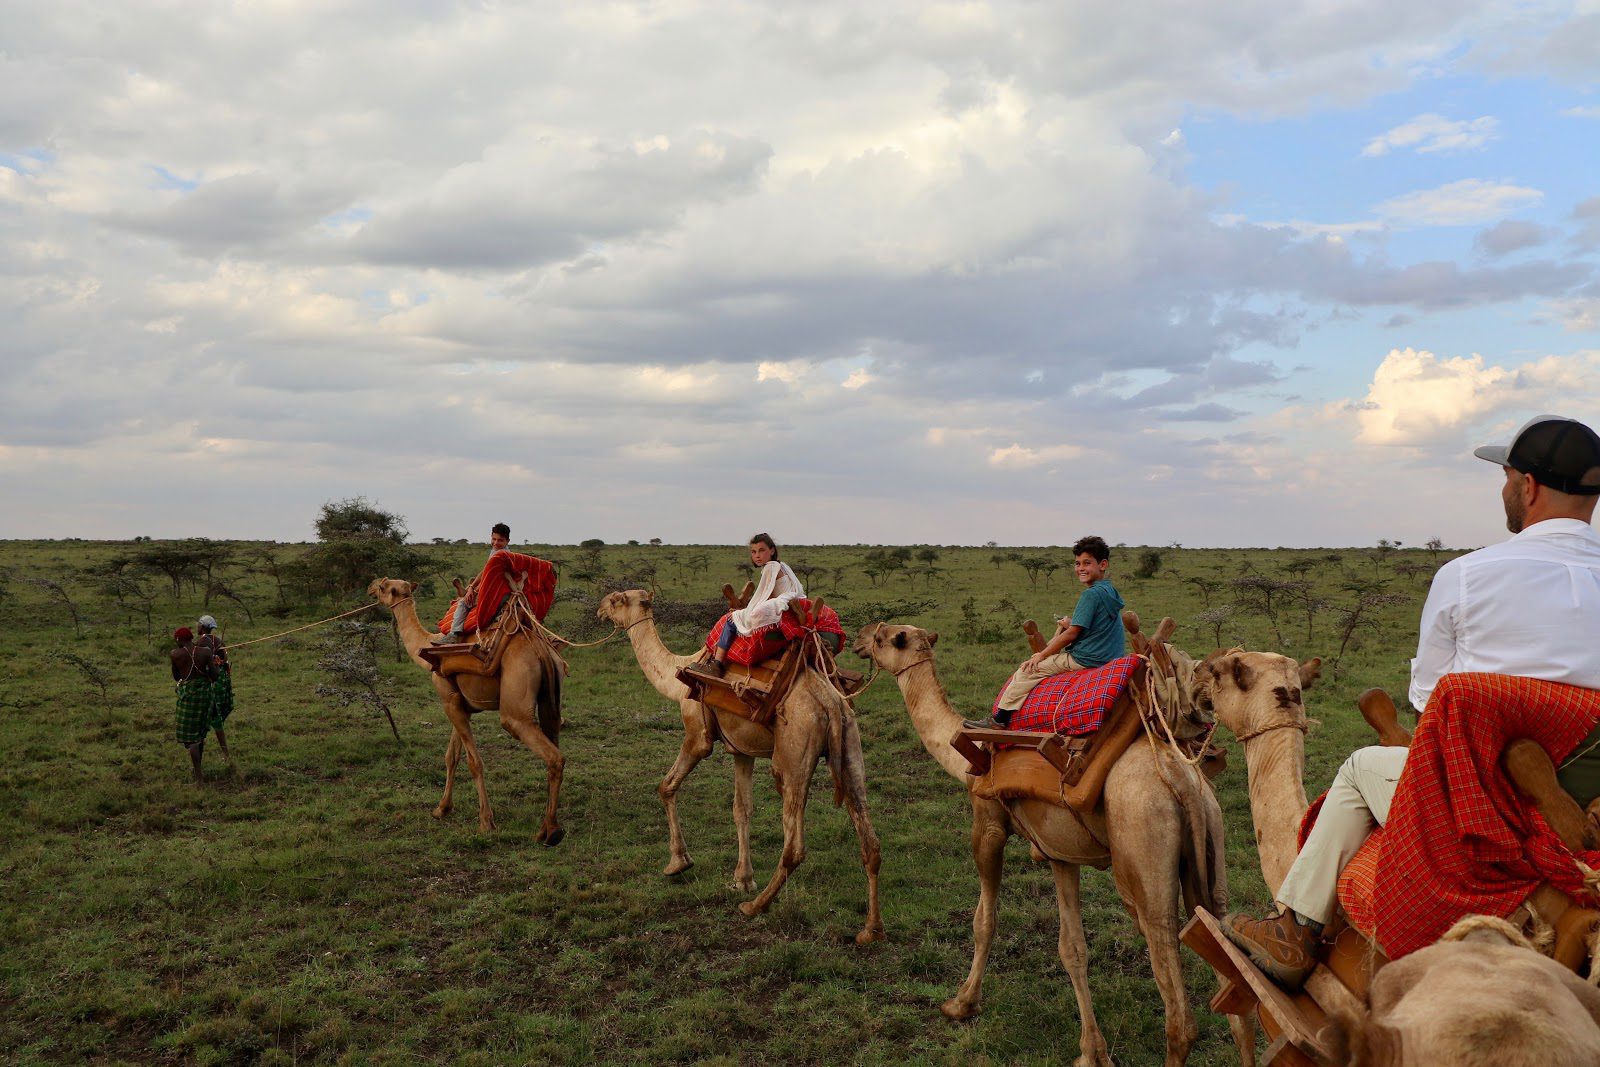 This Family's Amazing Safari Will Make You Want to Plan Your Own, Camal Rides